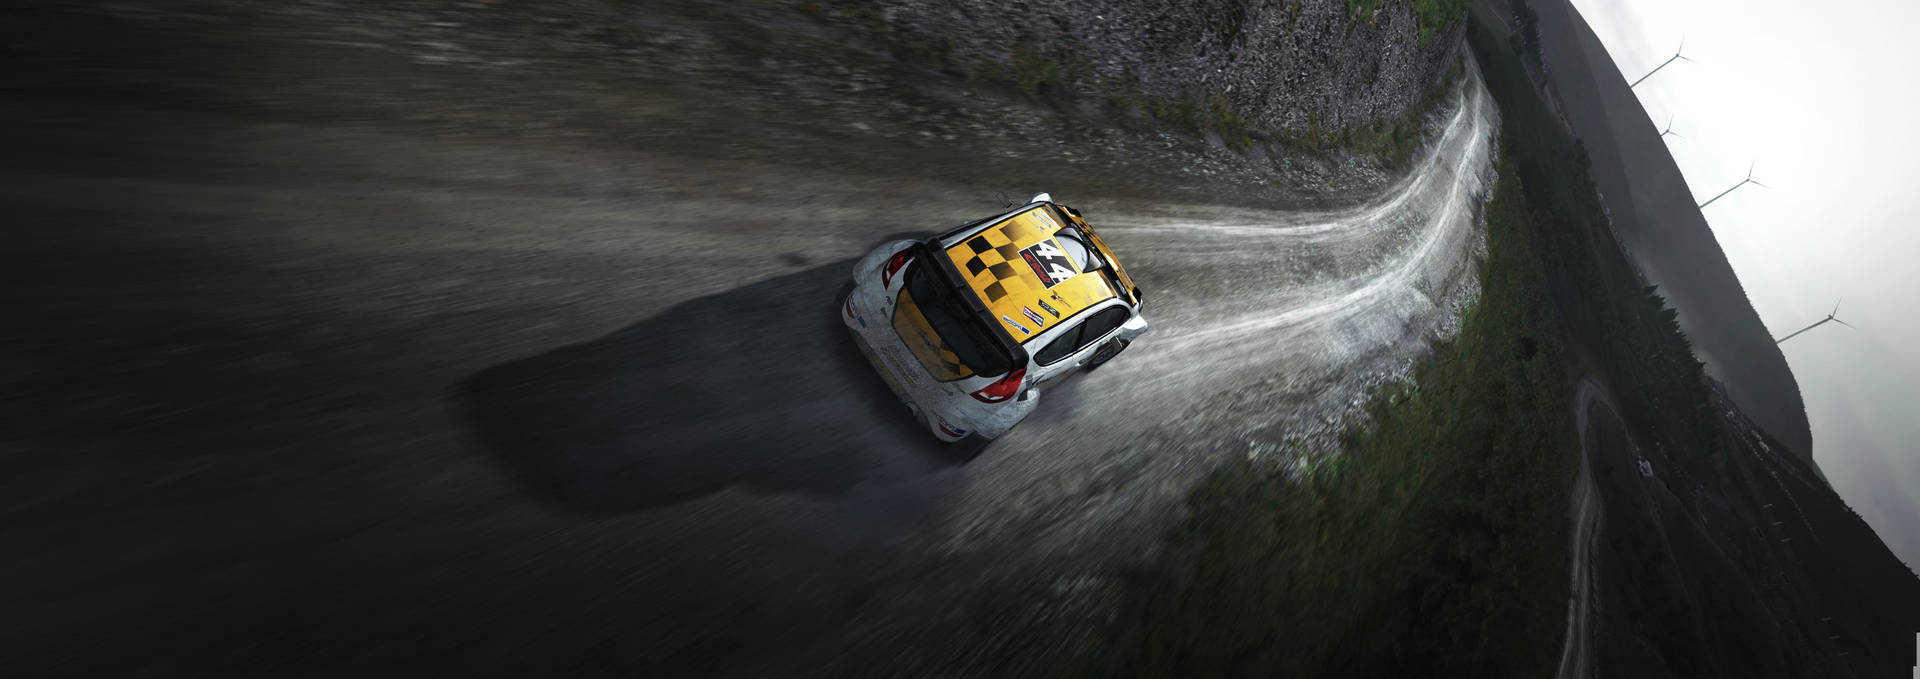 Dirt Rally Car In Muddy Road Background